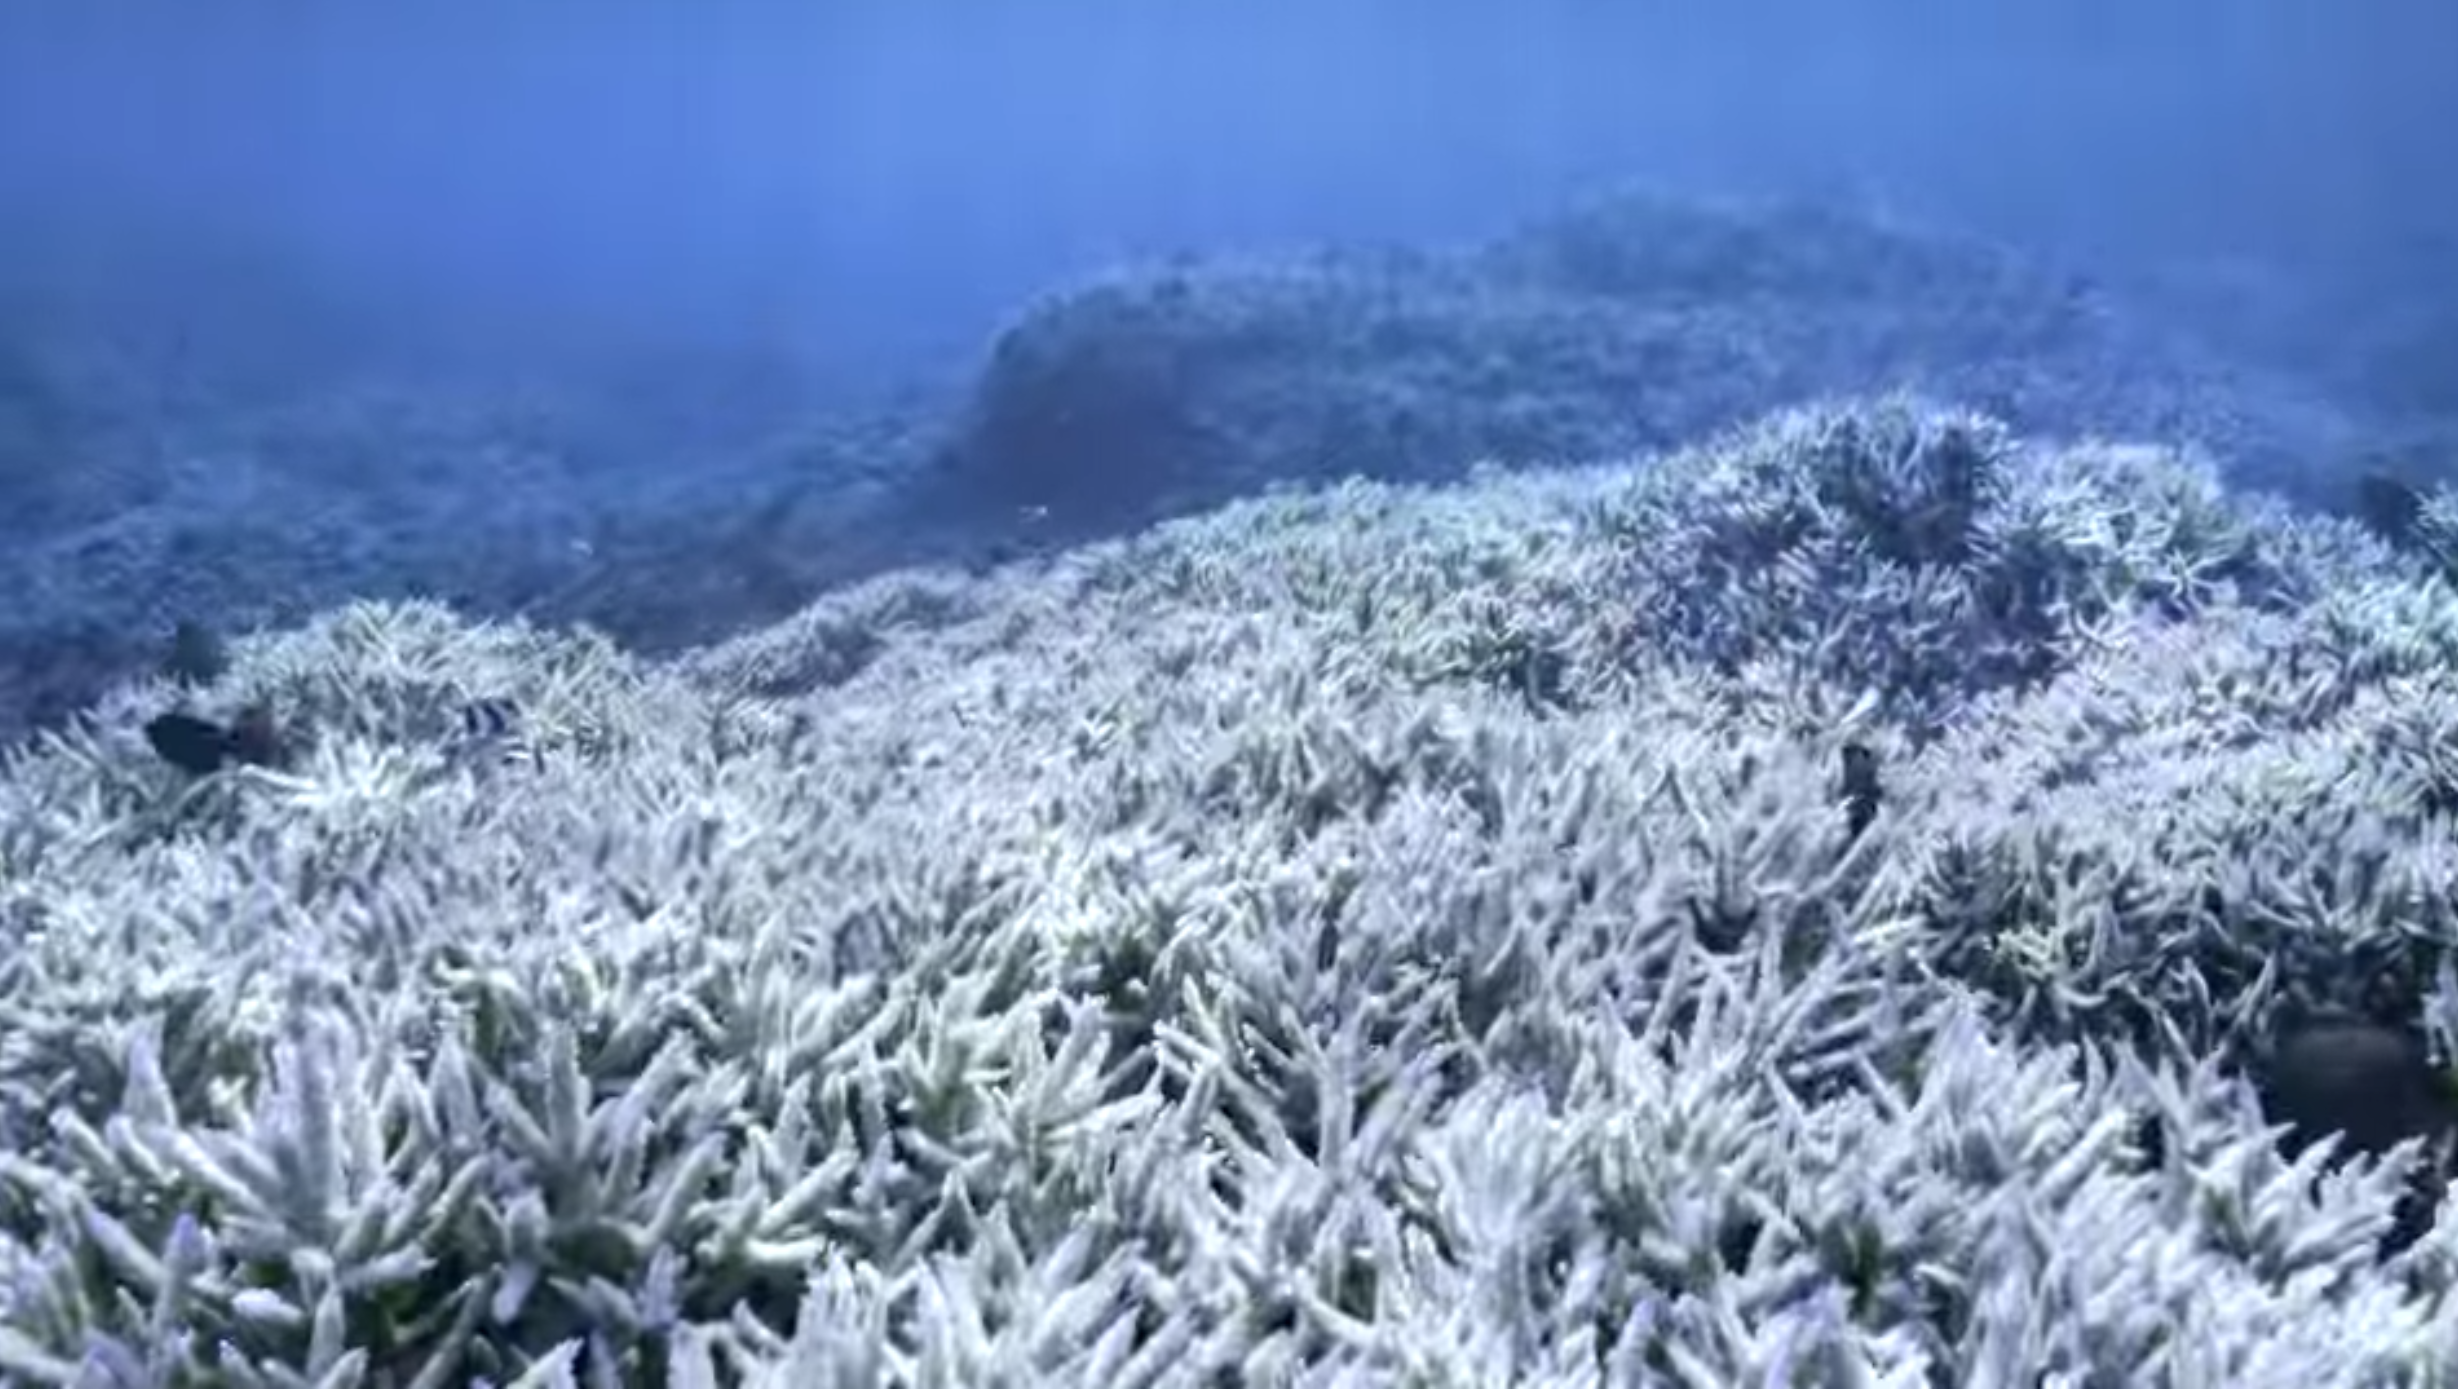 field of bleached coral off the coast of the American Samoa.